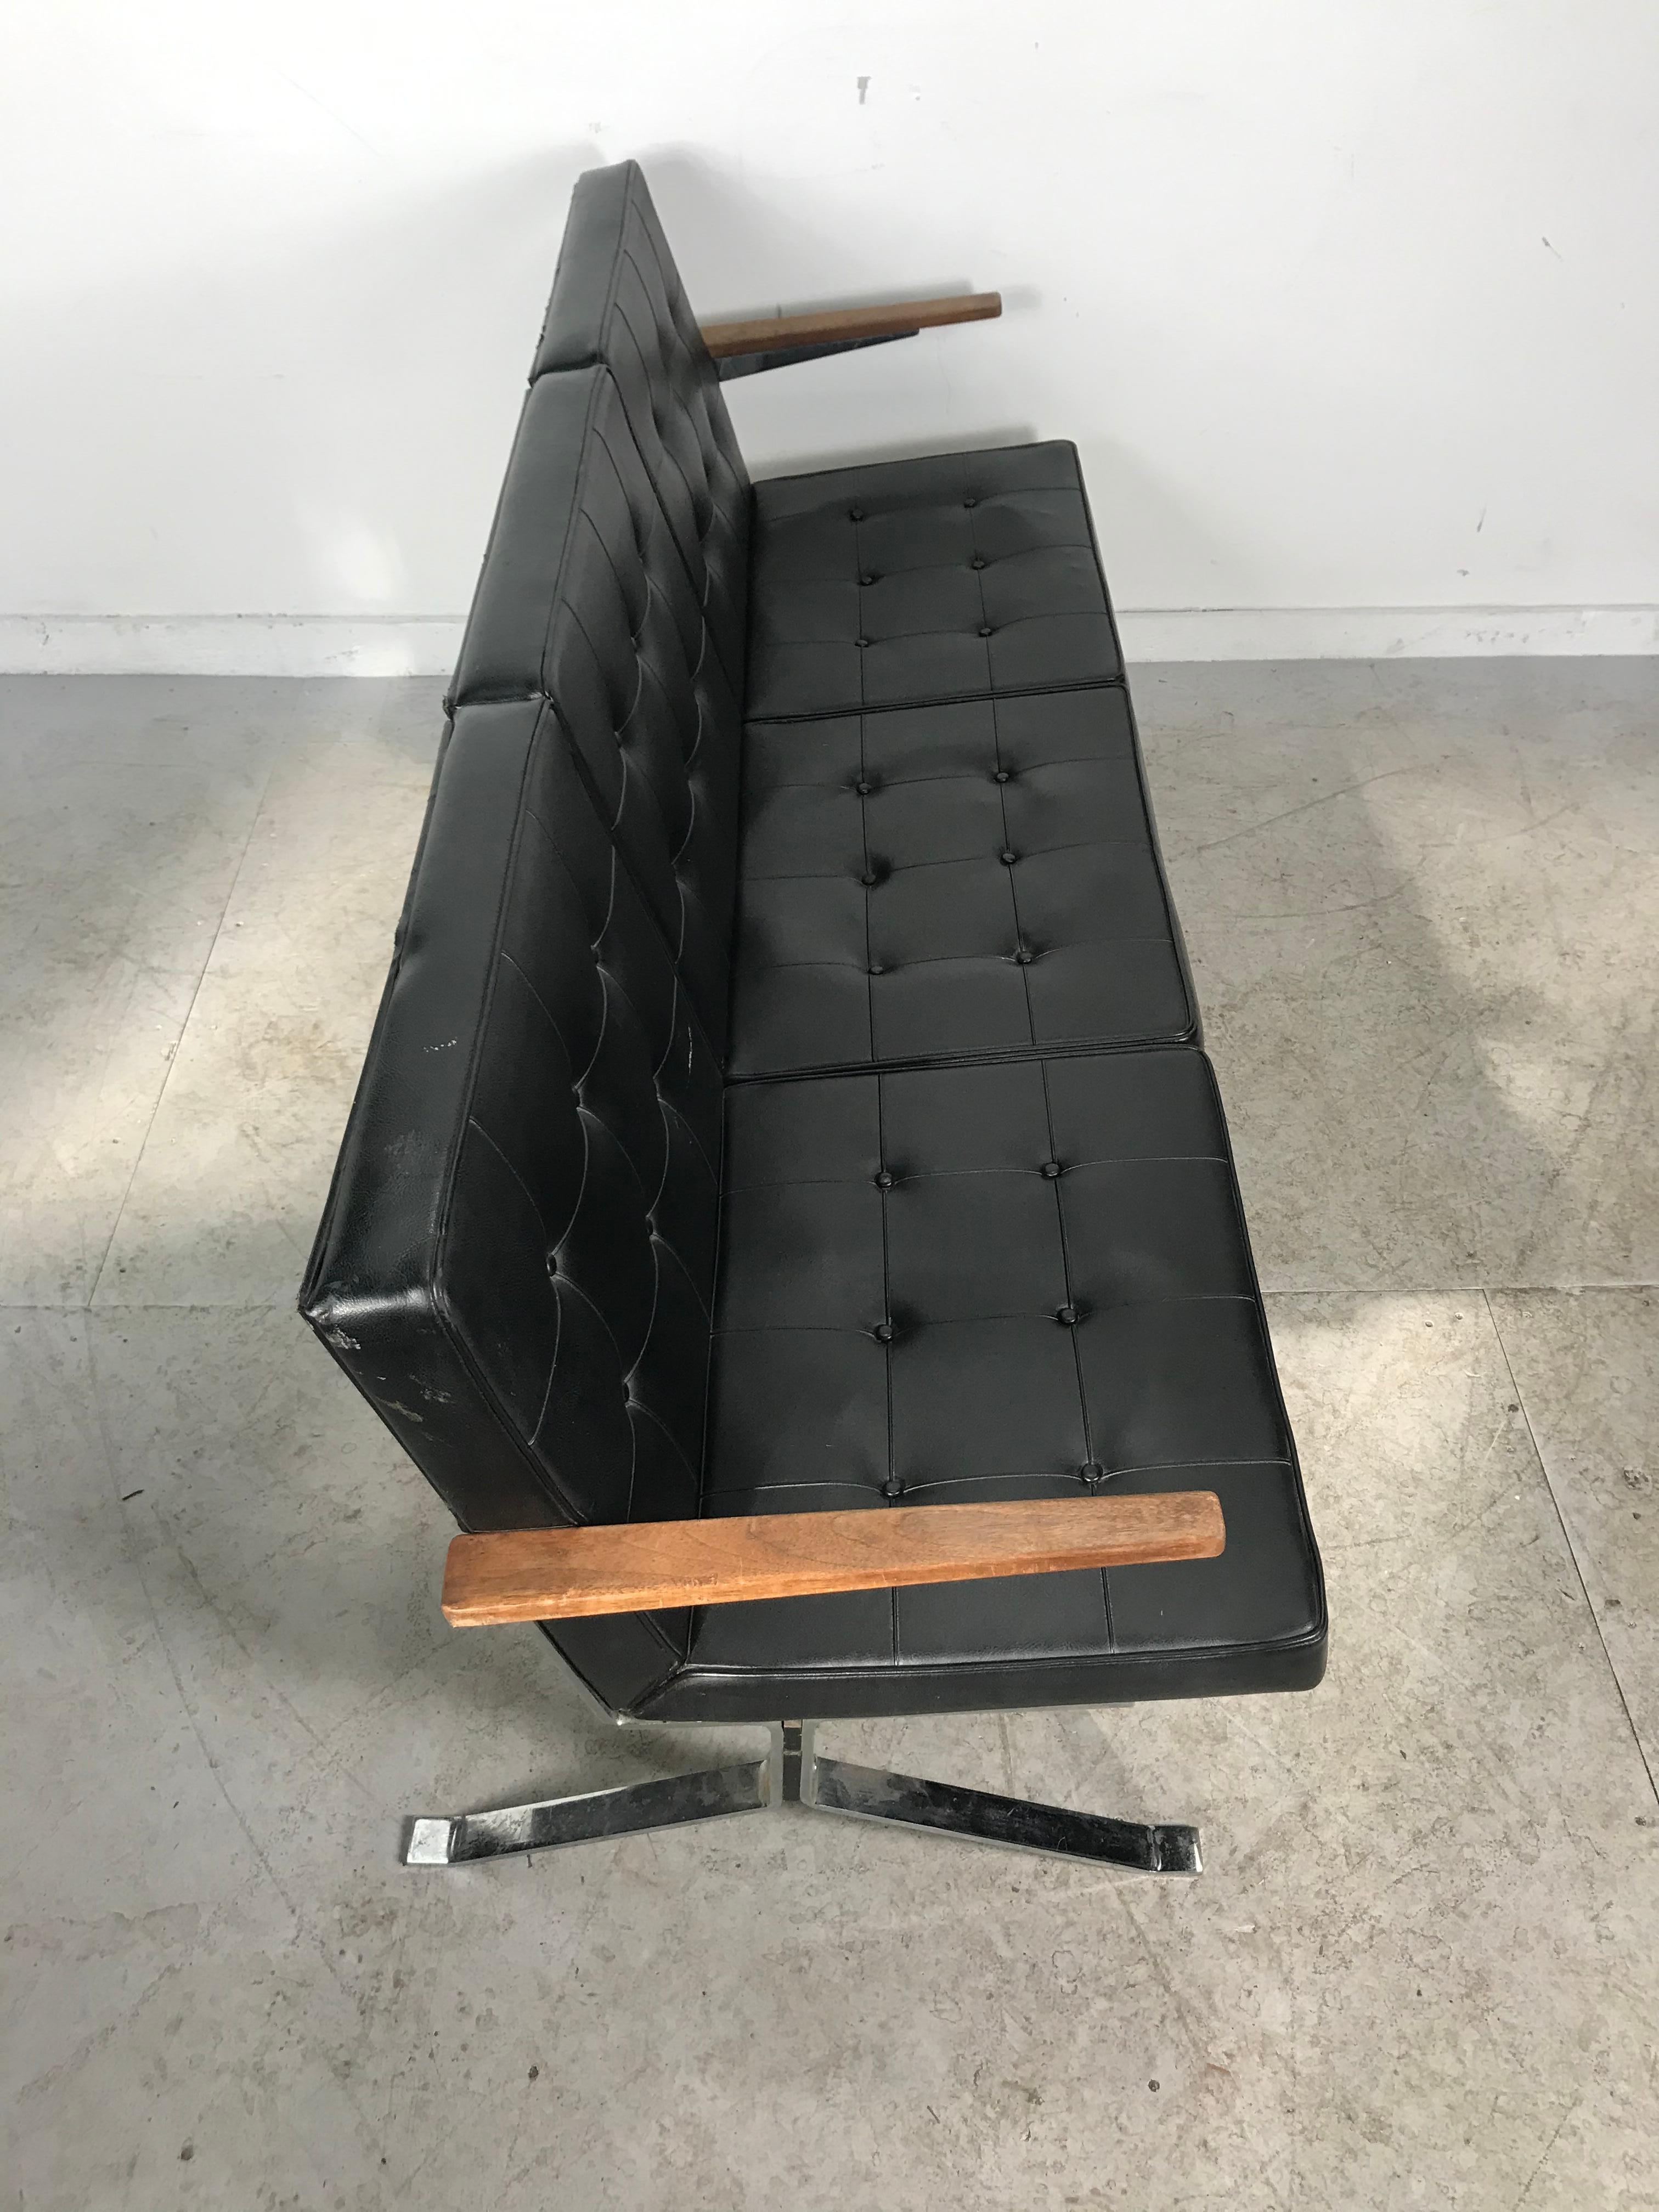 Classic 1960s Modernist Black and Chrome Bench Sette', after Arne Norell In Fair Condition For Sale In Buffalo, NY